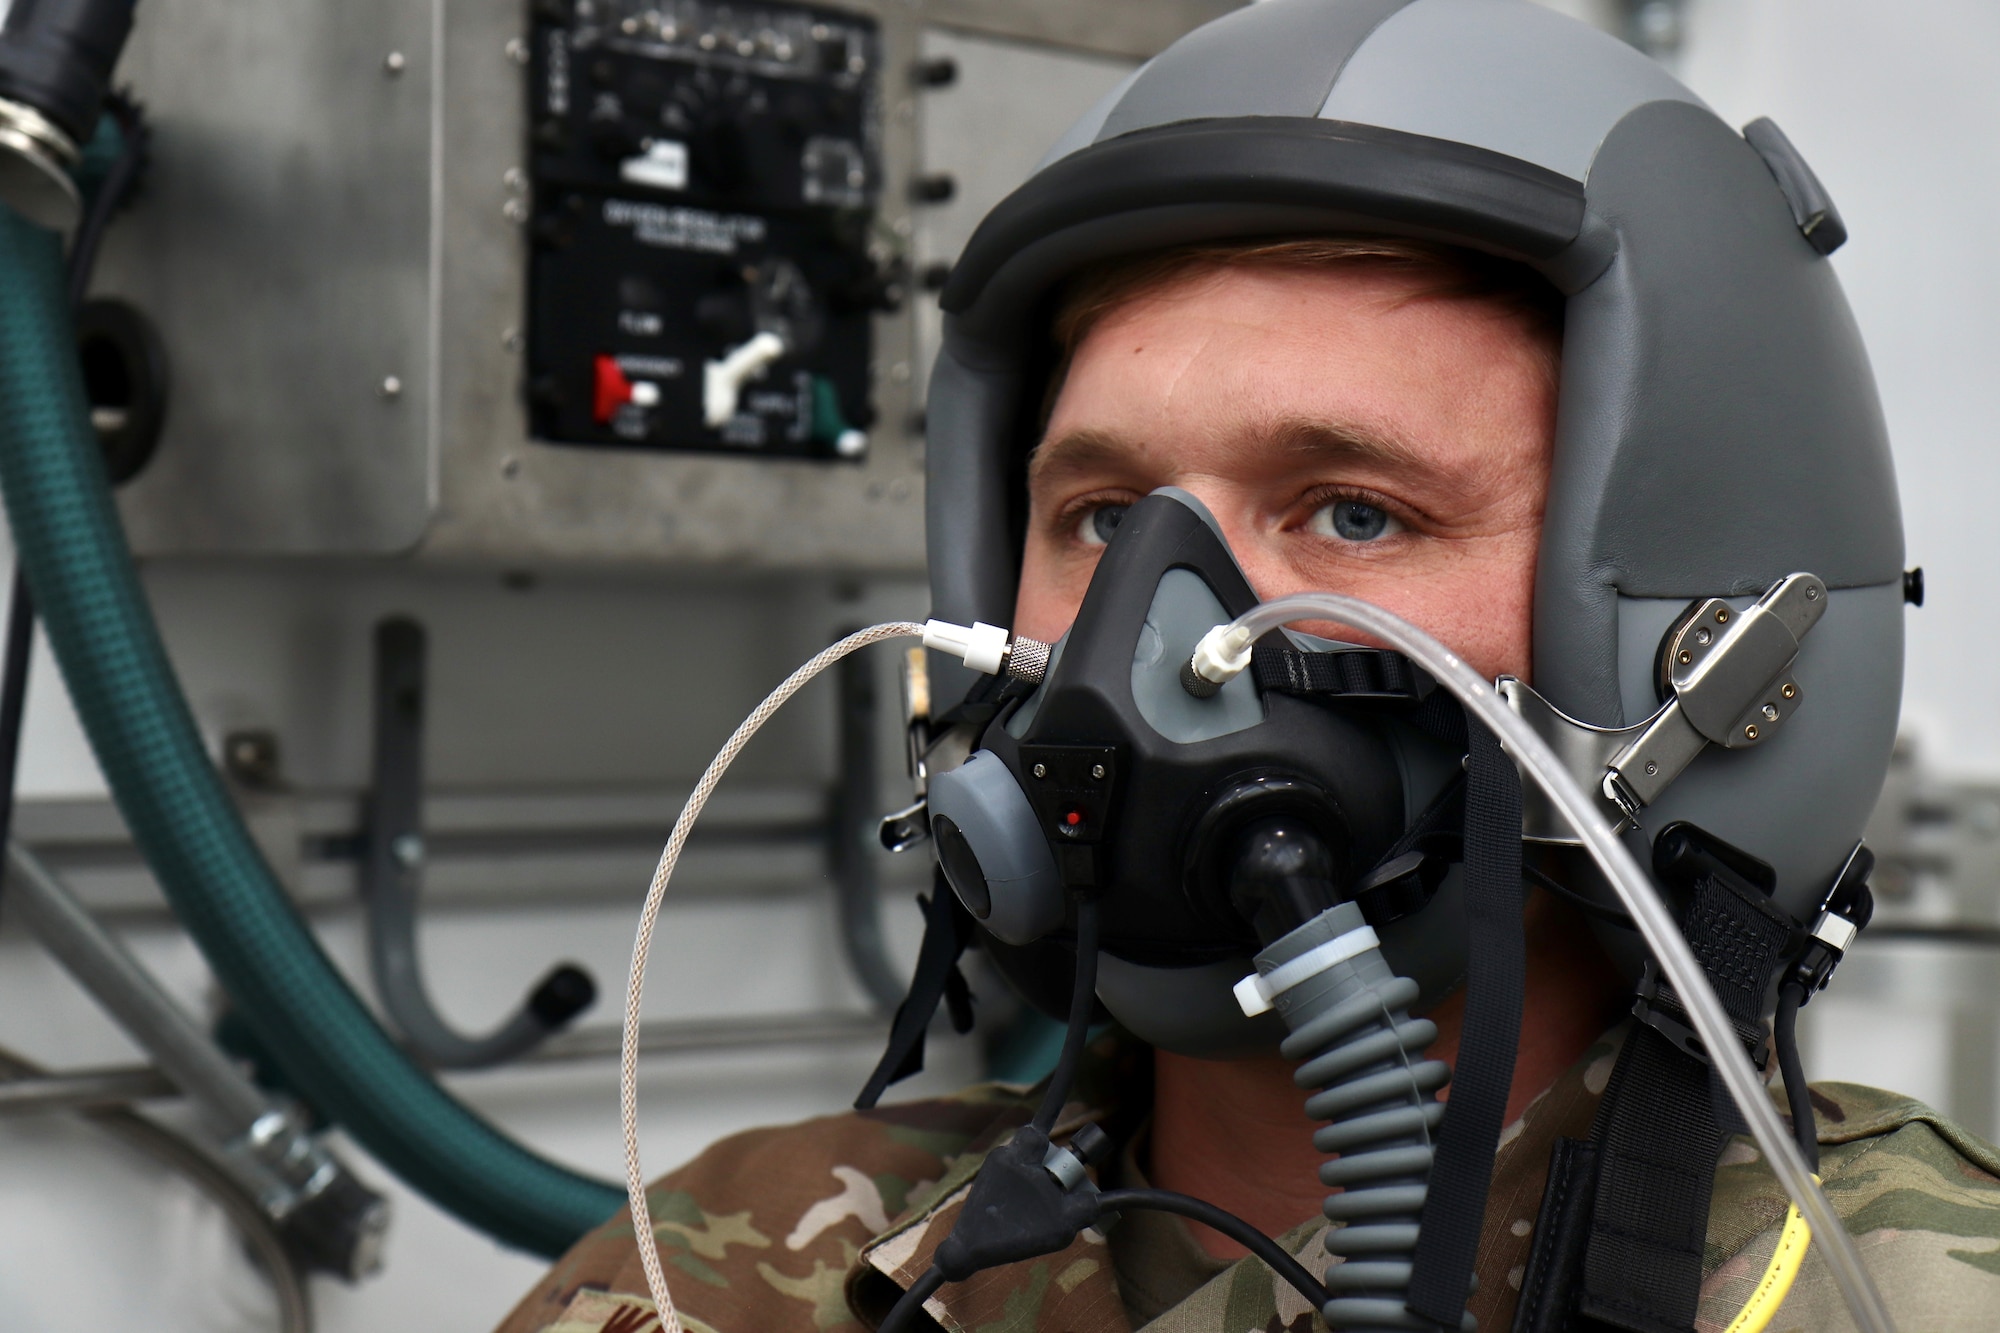 Tech. Sgt. Tyler Wineman waits for an oxygen system test to begin inside a Research Altitude Chamber at Wright Patterson Air Force Base, Ohio, April 15, 2022. The chamber is one of three at the base that were certified in March for manned research up to 50,000 feet, a benchmark found nowhere else in the Department of Defense. Wineman is an aircrew flight equipment research technician assigned to the 711th Human Performance Wing, the Air Force Research Laboratory unit that operates the chambers. (U.S. Air Force photo/Jason Schaap)